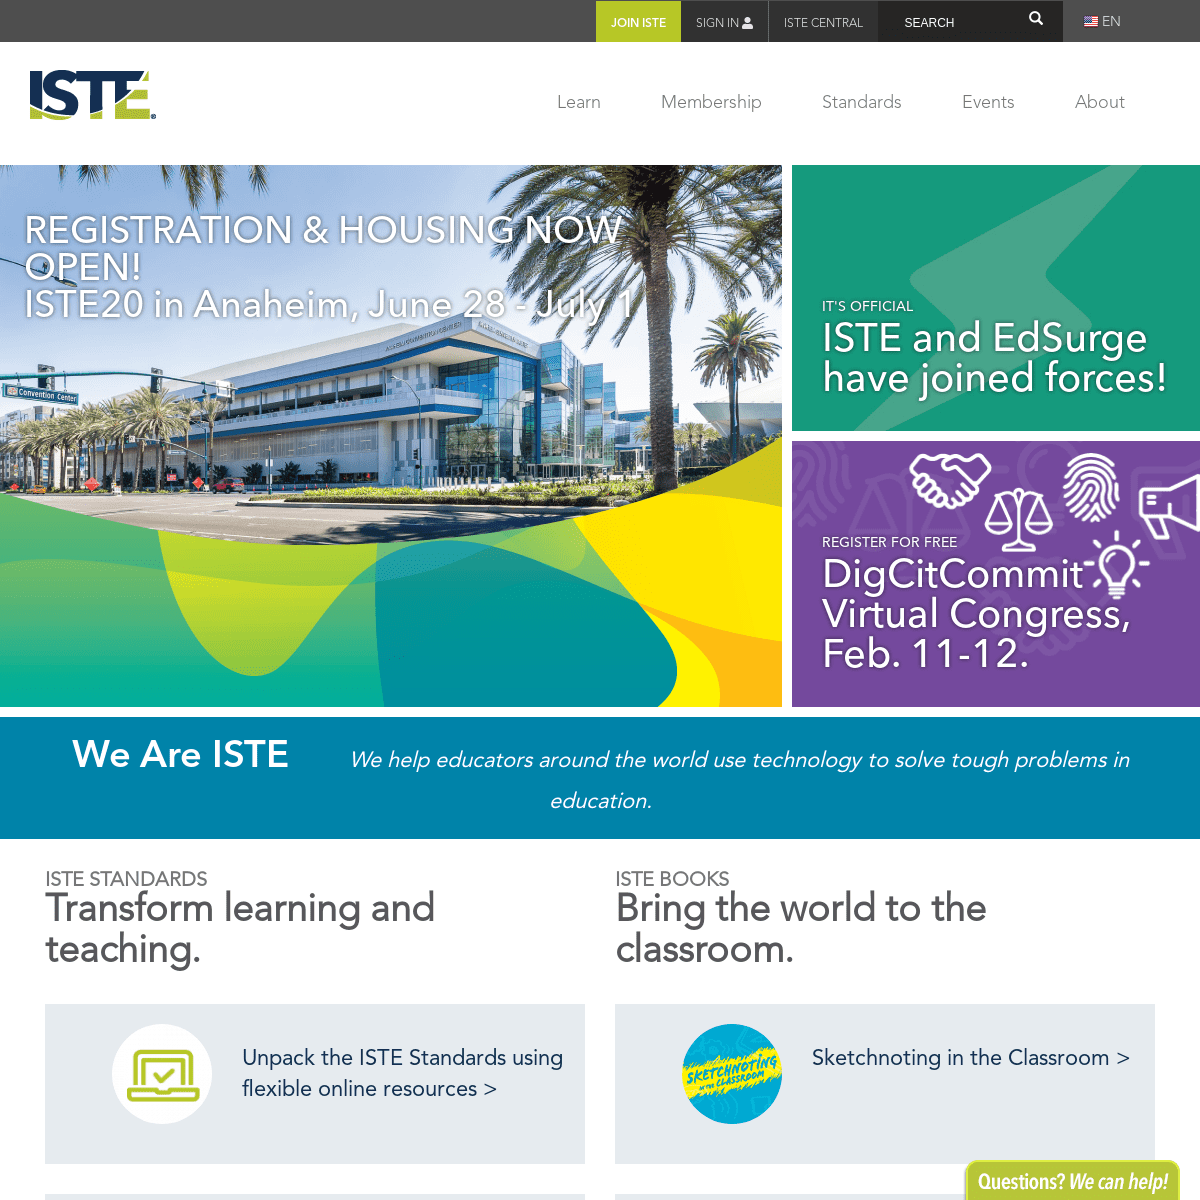 A complete backup of iste.org